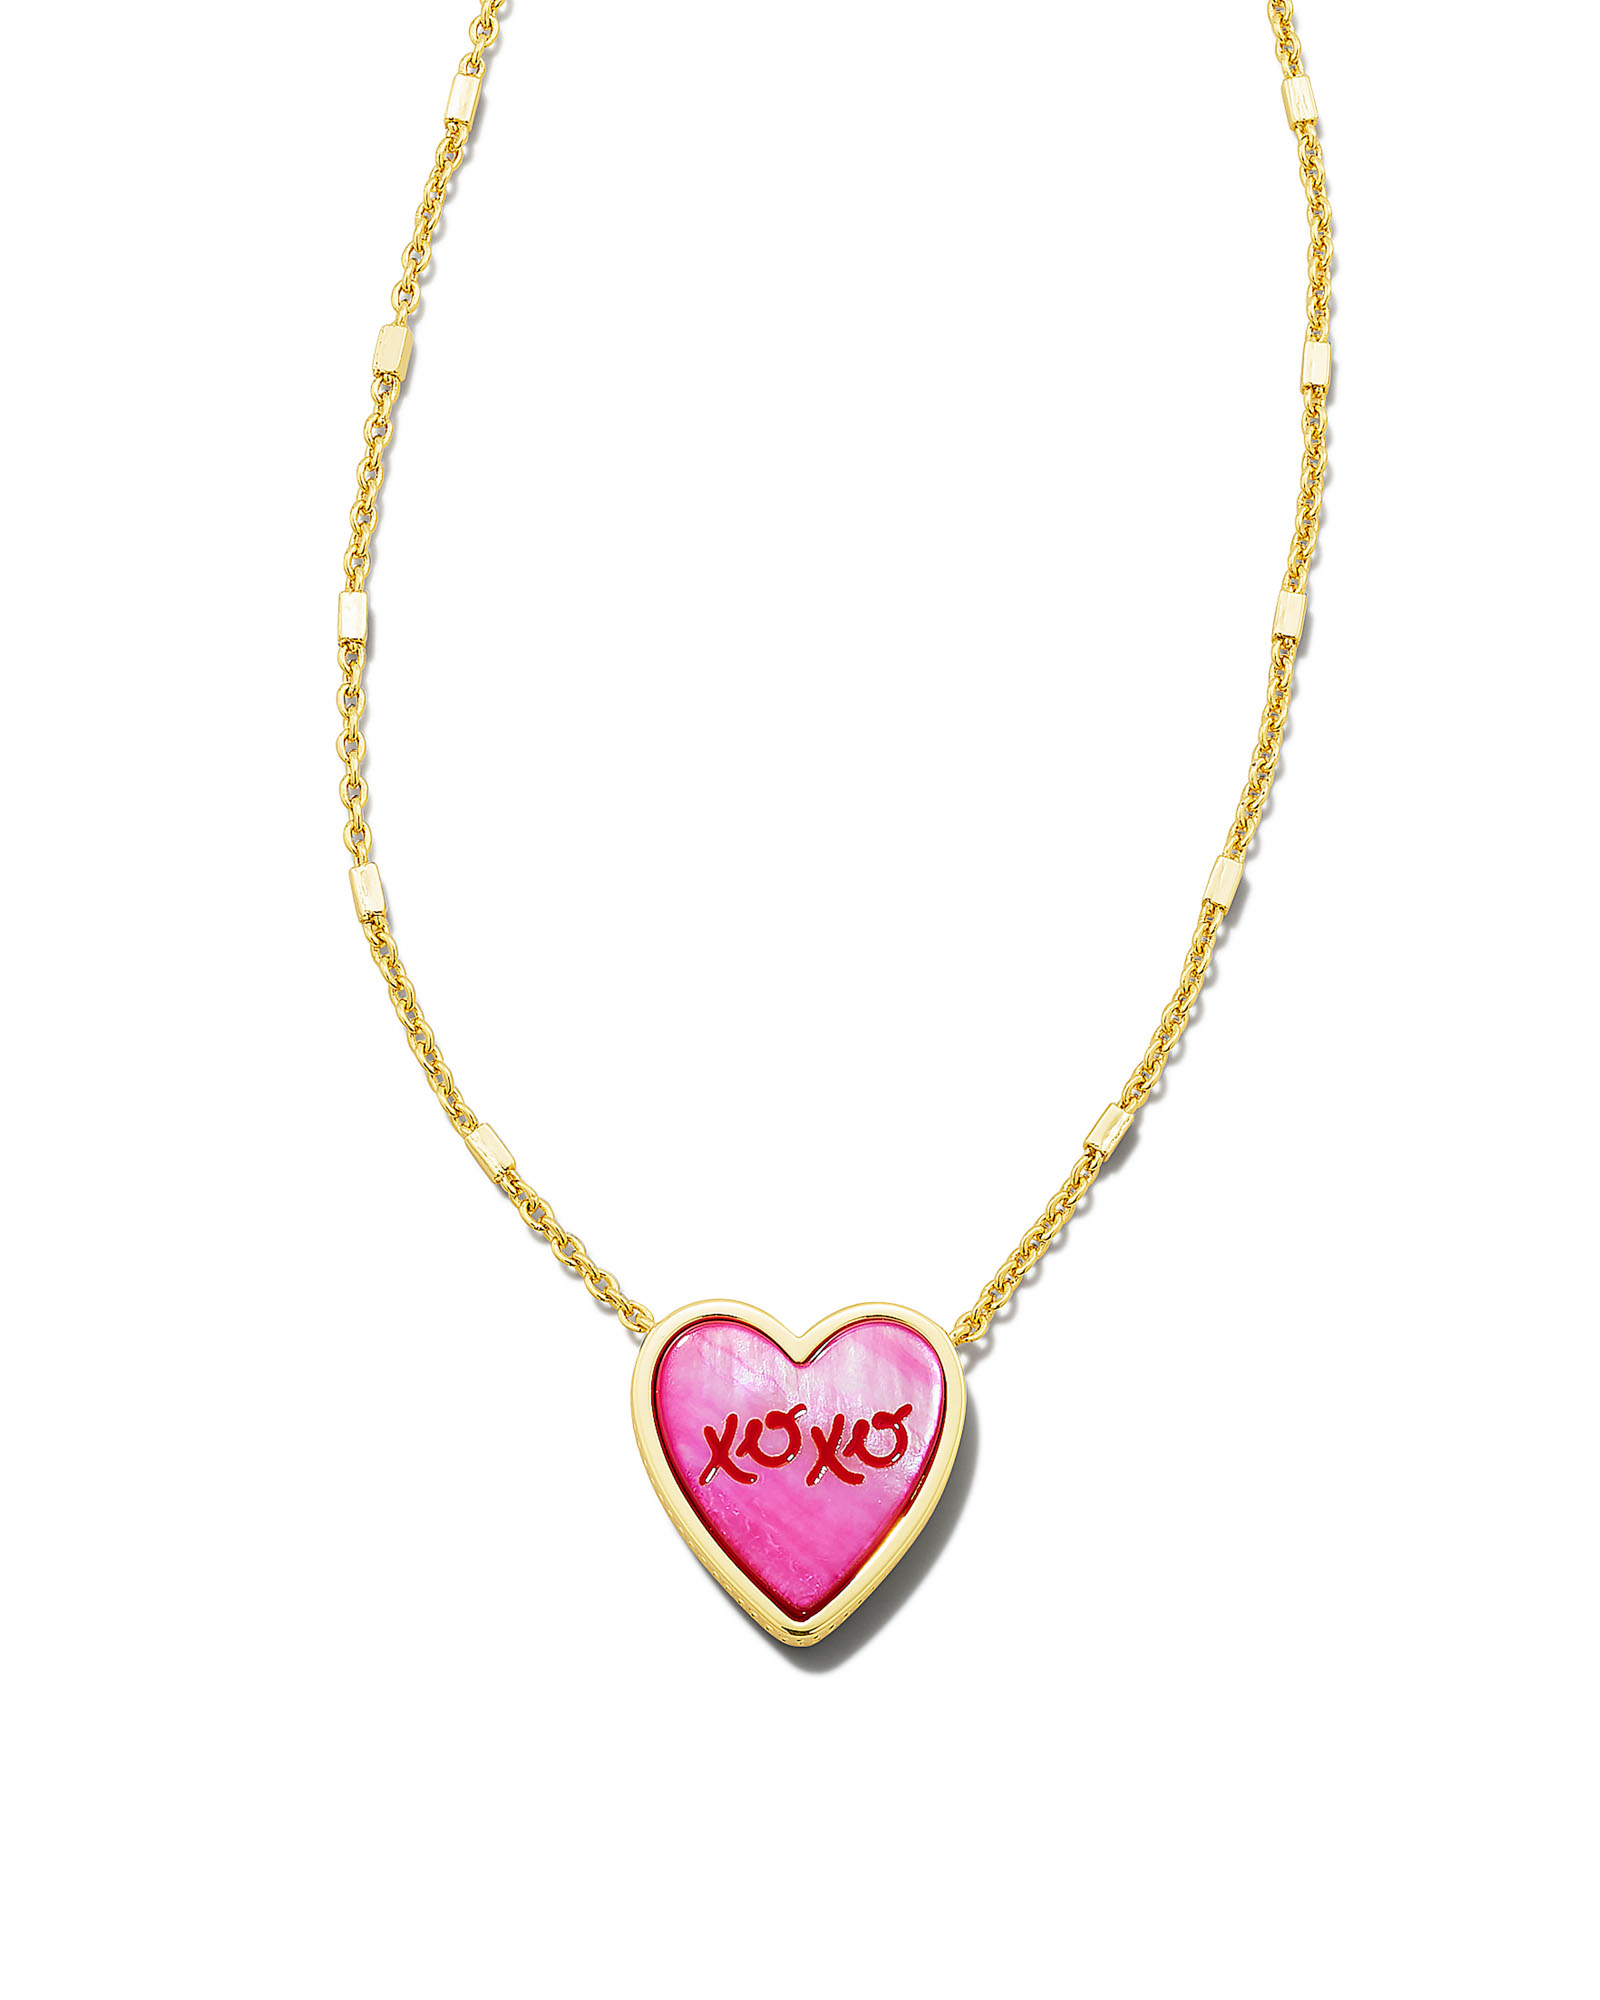 XOXO Gold Pendant Necklace in Hot Pink Mother-of-Pearl | Kendra Scott